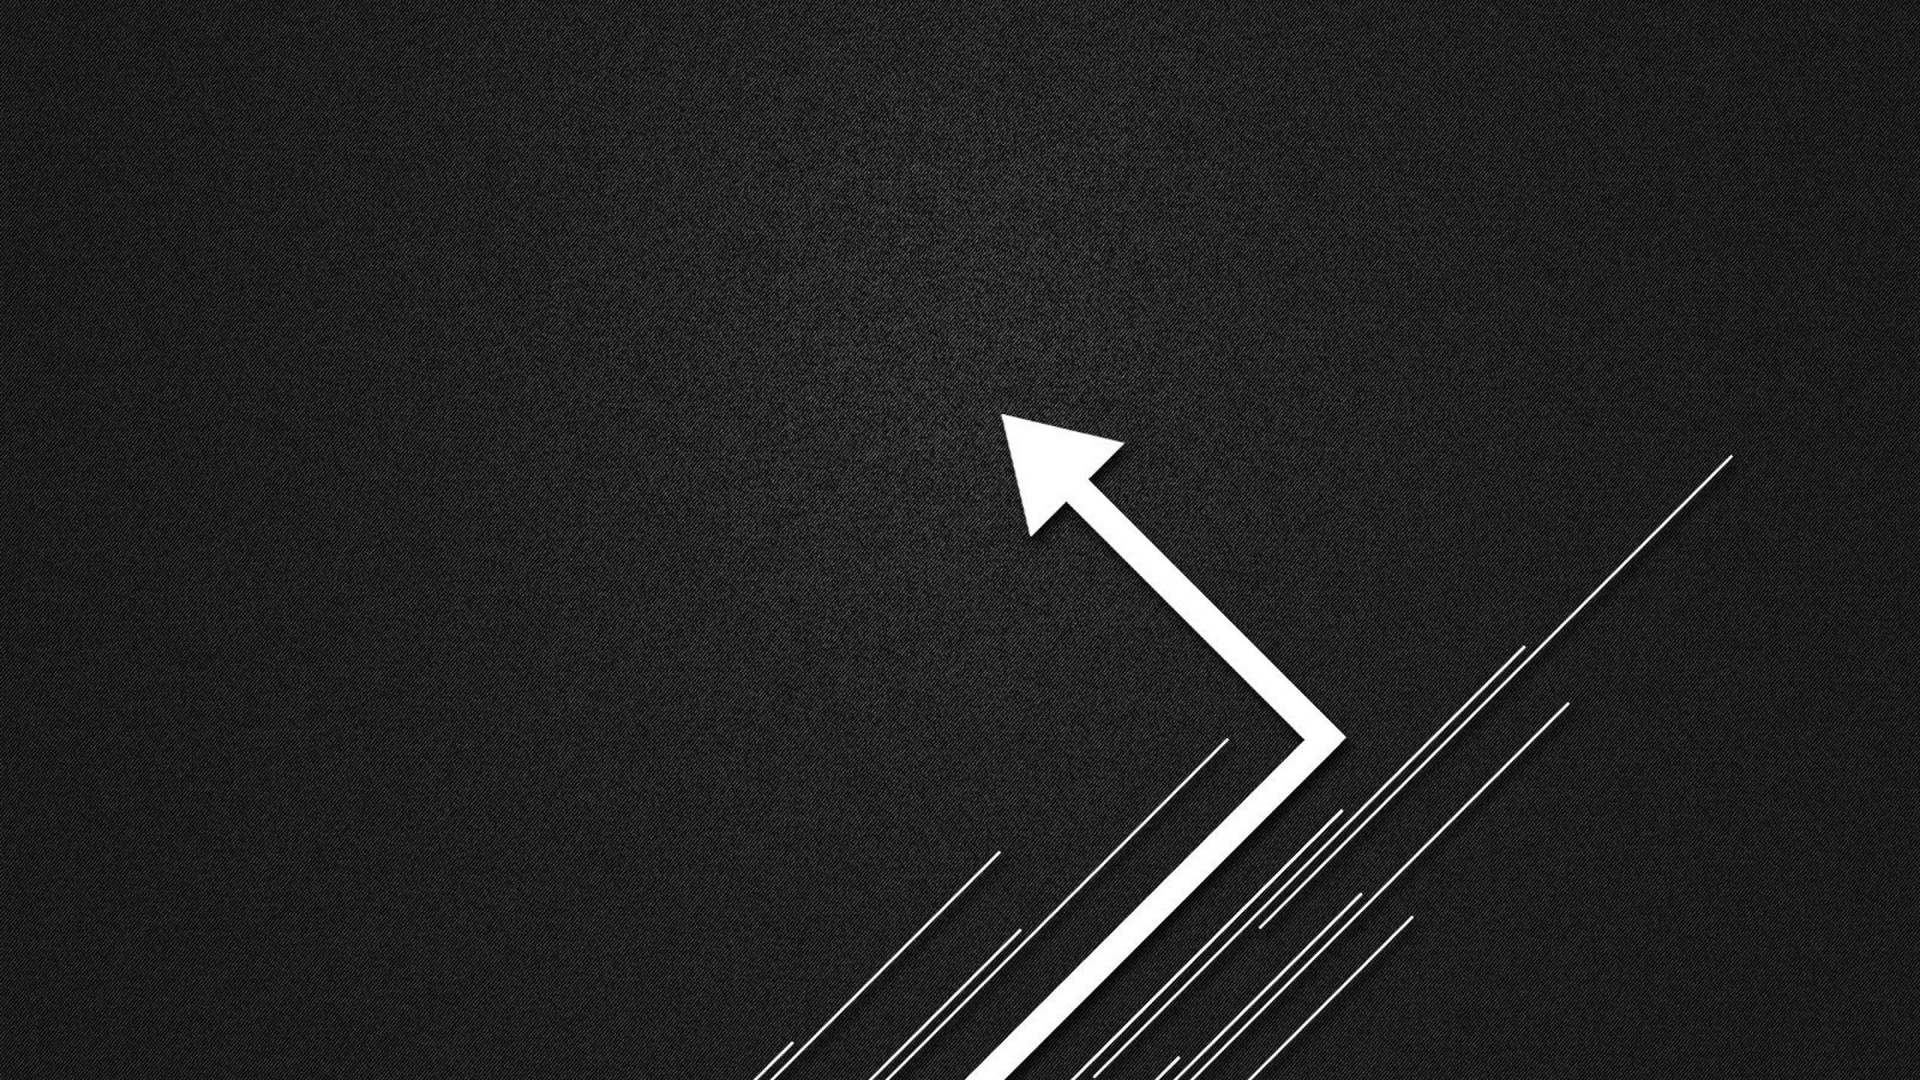 By Stephen Ments Off On Abstract Arrow HD Wallpaper